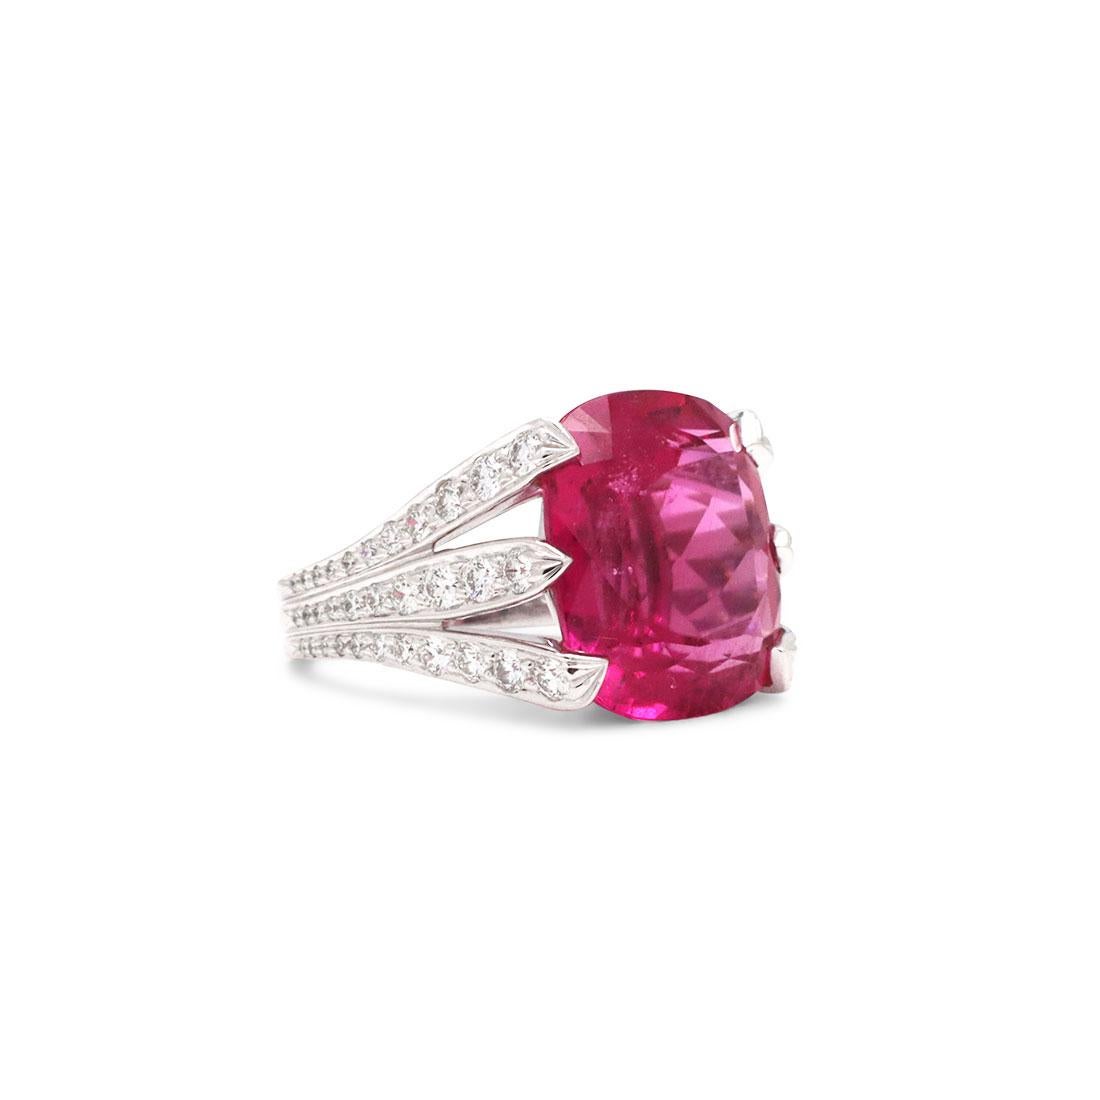 Authentic Verdura Six Blades ring crafted in platinum is set with a cushion cut hot pink Rubellite weighing an estimated 14.25ct. This ring is comprised of 6 prongs set with round brilliant cut diamonds with an estimated 1.25 total carat weight.